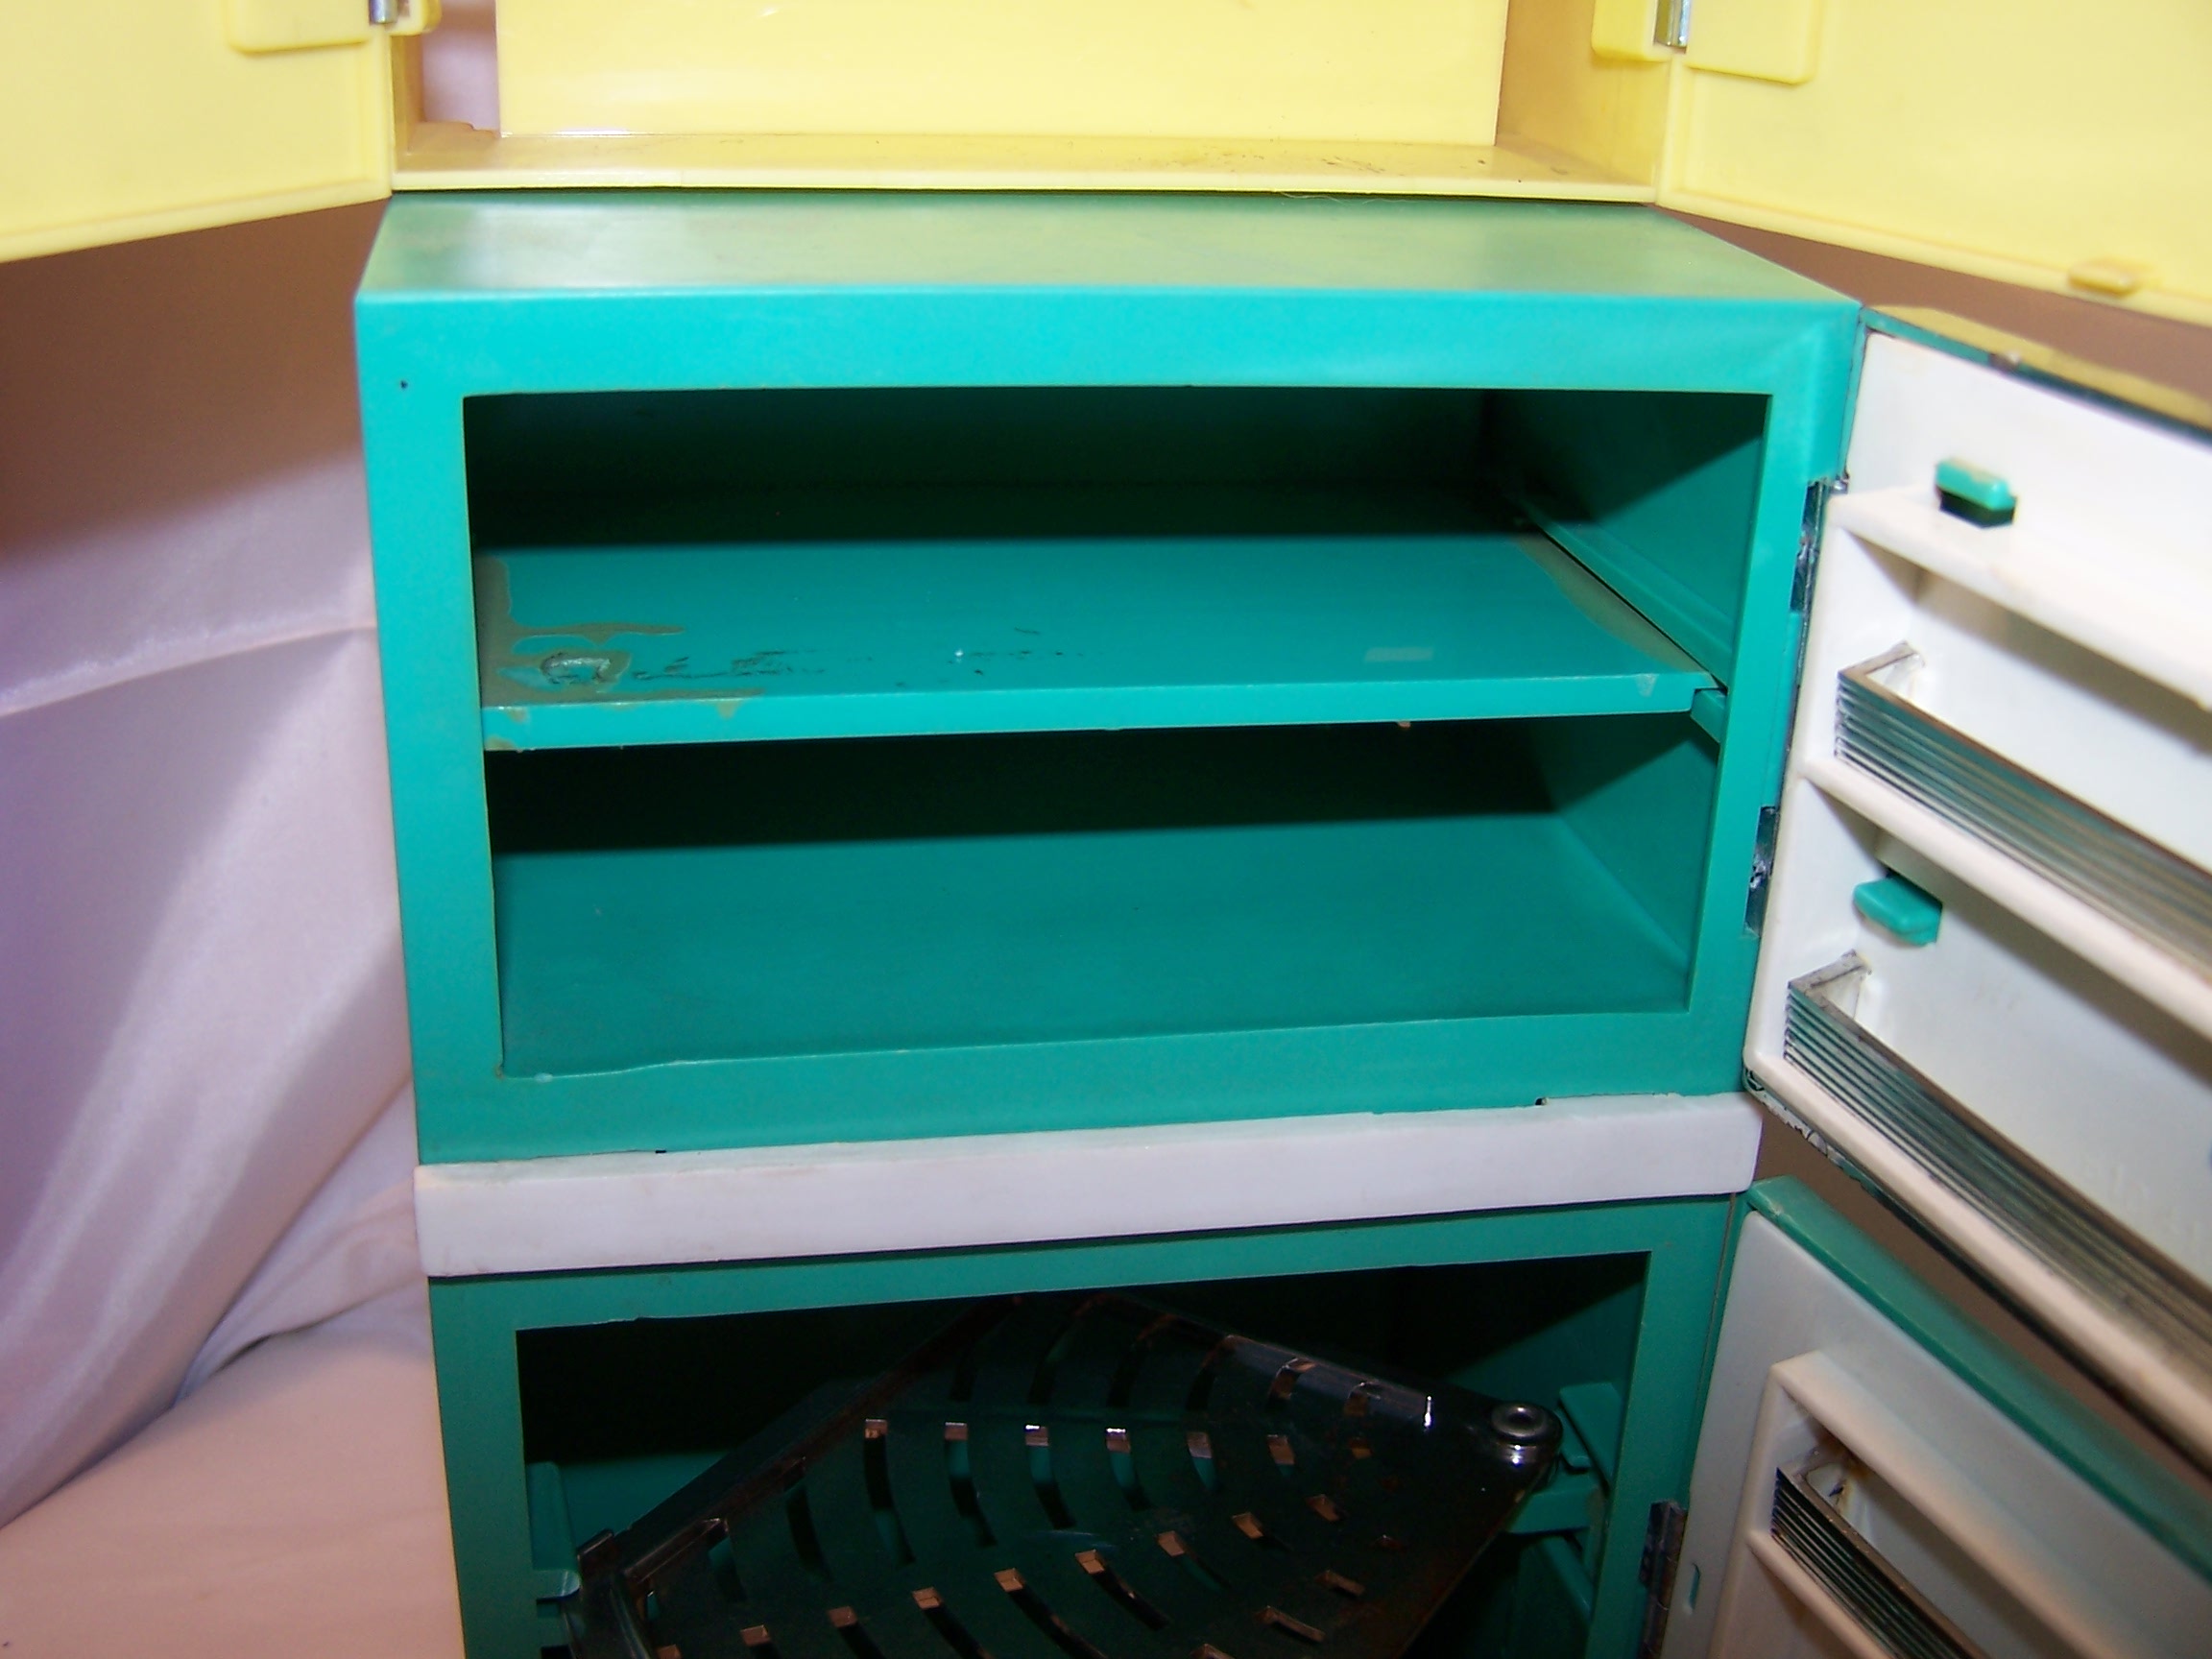 Image 15 of Deluxe Barbie Dream Kitchen, Refrigerator, Table and Chairs